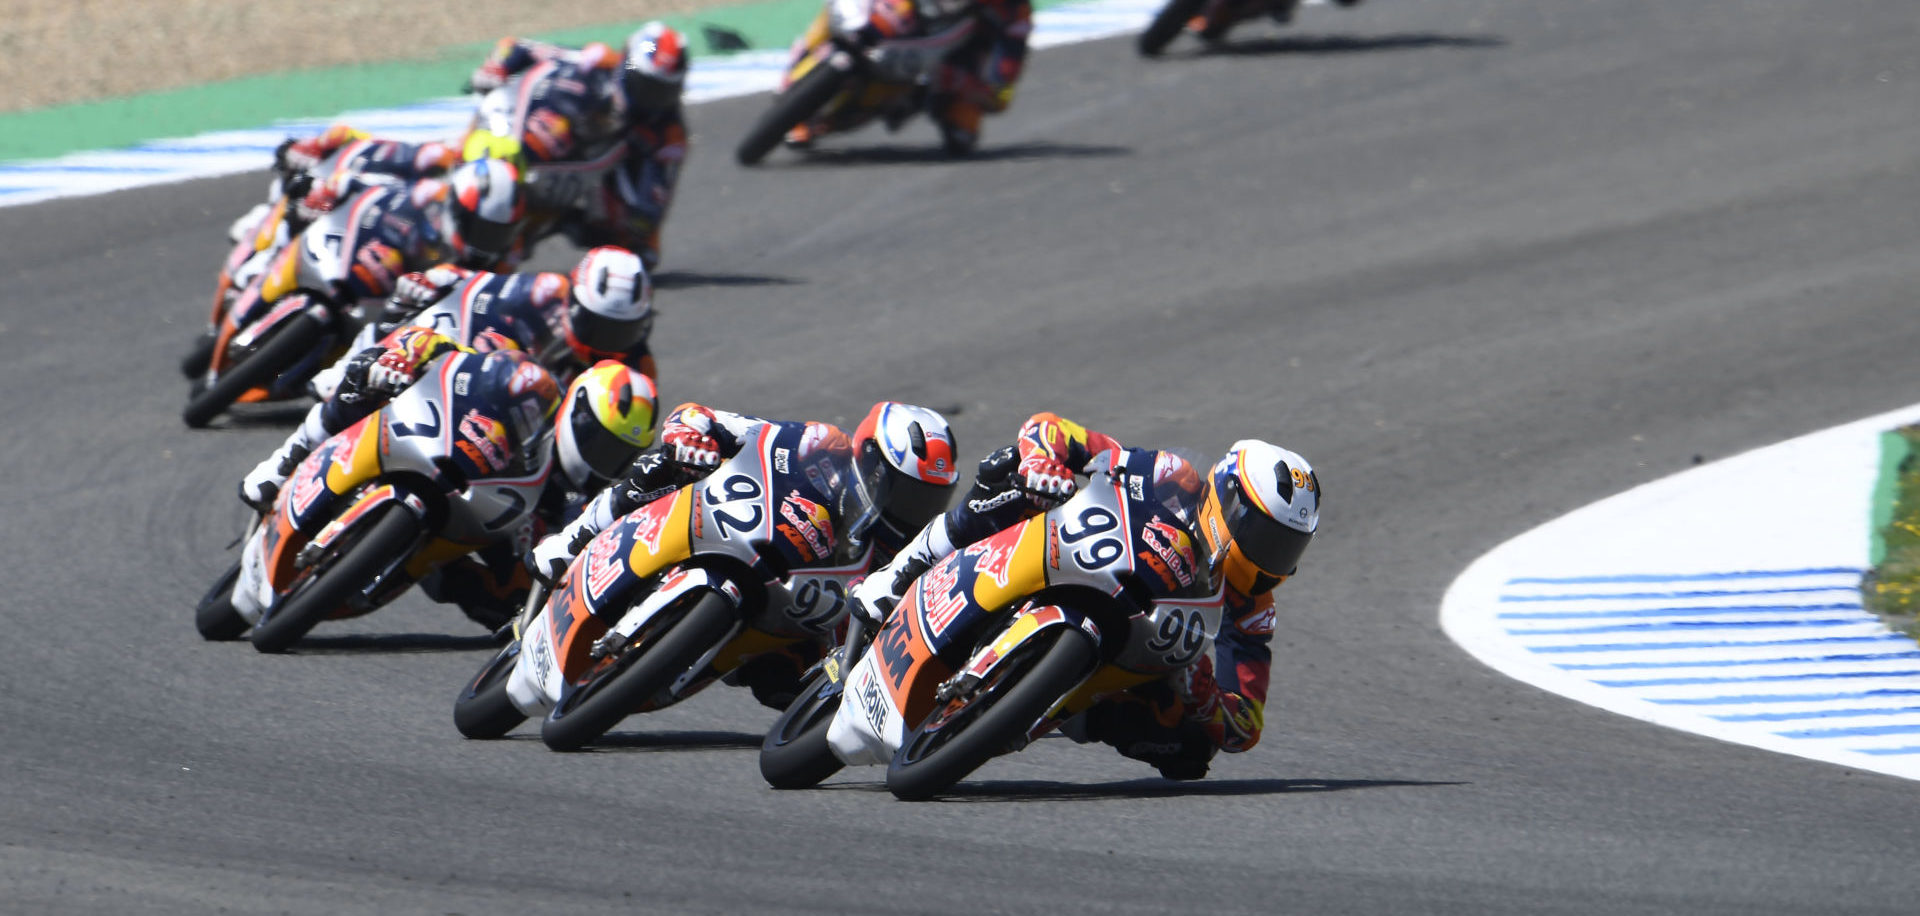 Action from a Red Bull MotoGP Rookies Cup race at Jerez in 2019. Photo by GEPA Pictures, courtesy of Red Bull.